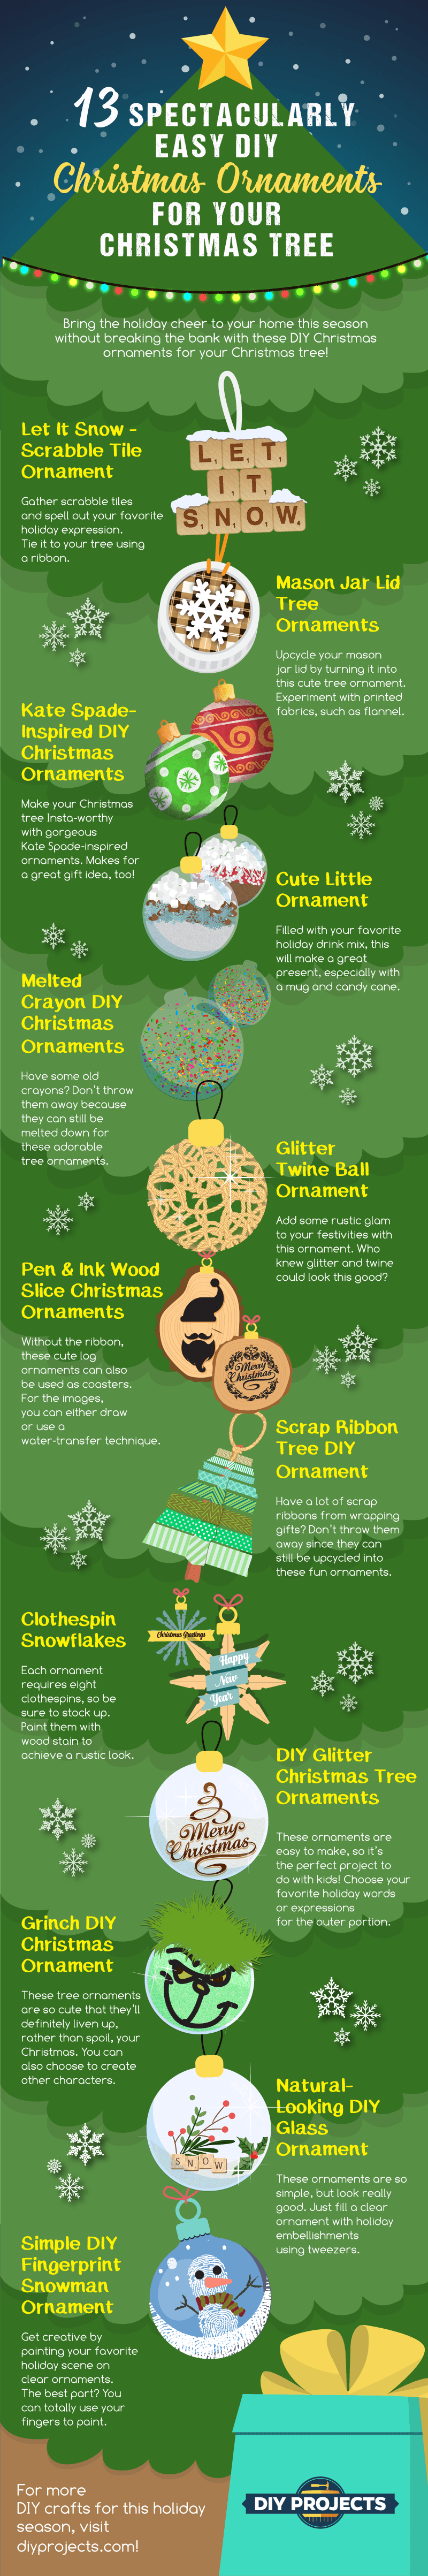 Infographic | Easy DIY Christmas Ornaments For A Personalized Tree Decor